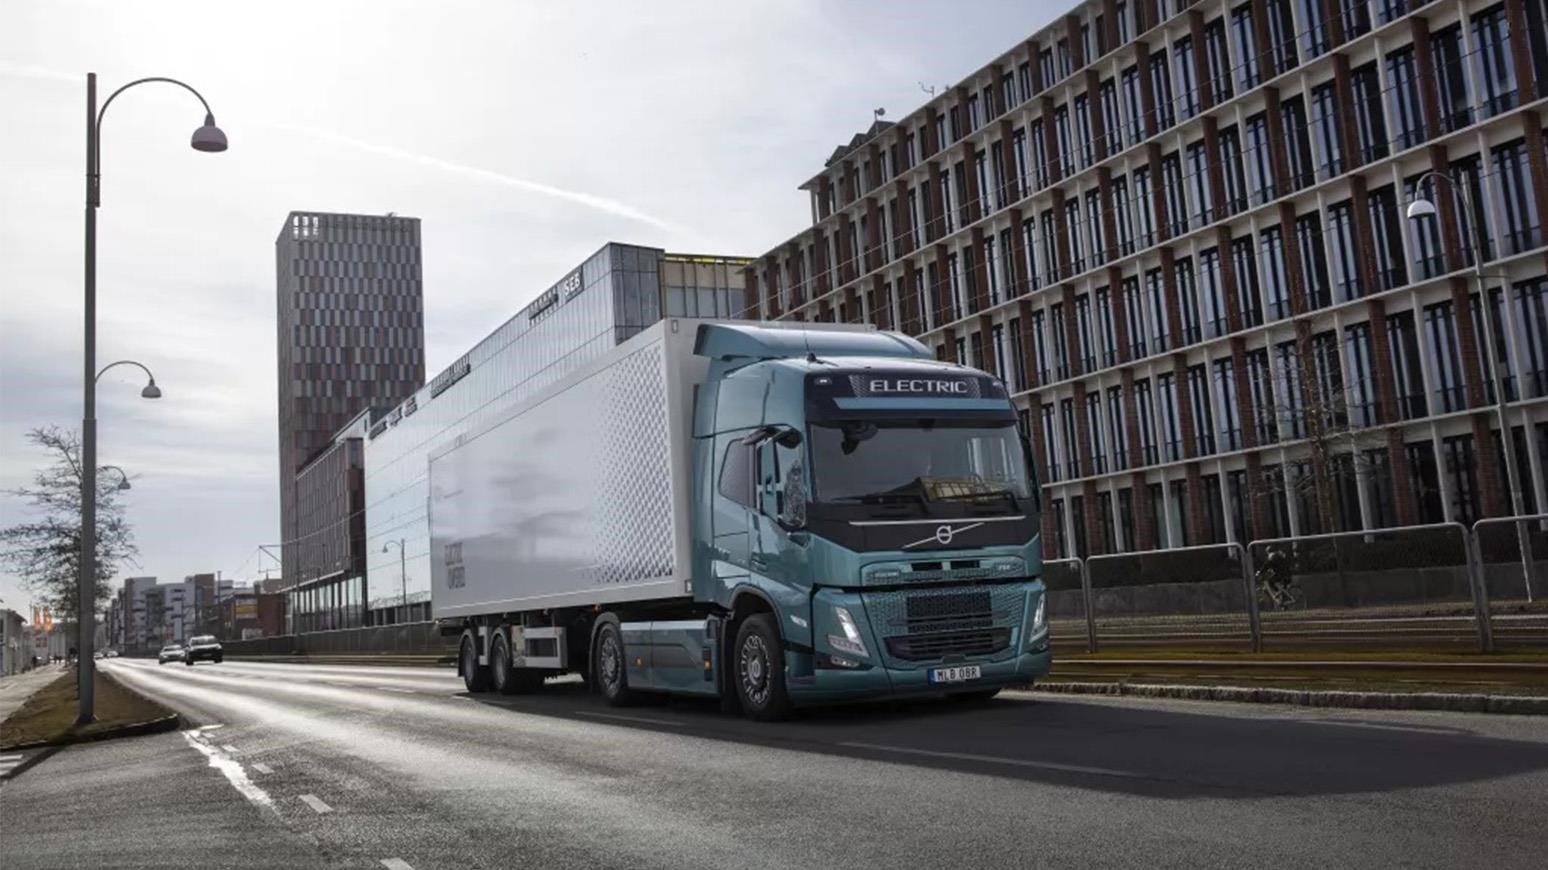 Volvo I-Shift Transmission Upgrade Yields 30% Faster Gear Changes In Diesel & Electric Heavy-Duty Trucks